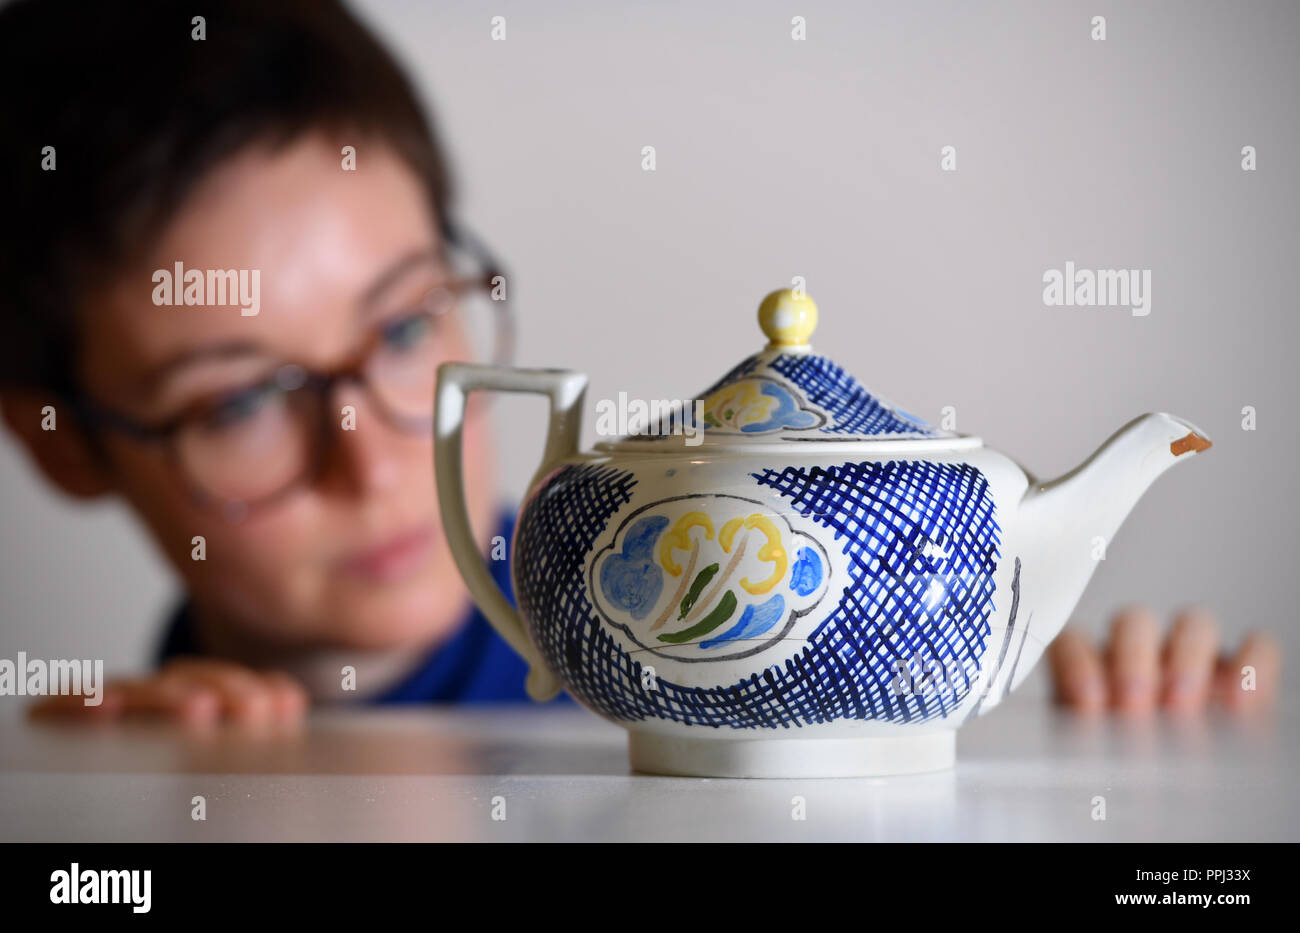 Conservator Flavia Ravaioli inspects a Wedgwood teapot used by Virginia Woolf and hand-decorated by her sister Vanessa Bell, at the Fitzwilliam Museum in Cambridge, where an exhibition inspired by the celebrated author and feminist's writings opens on October 2. Stock Photo